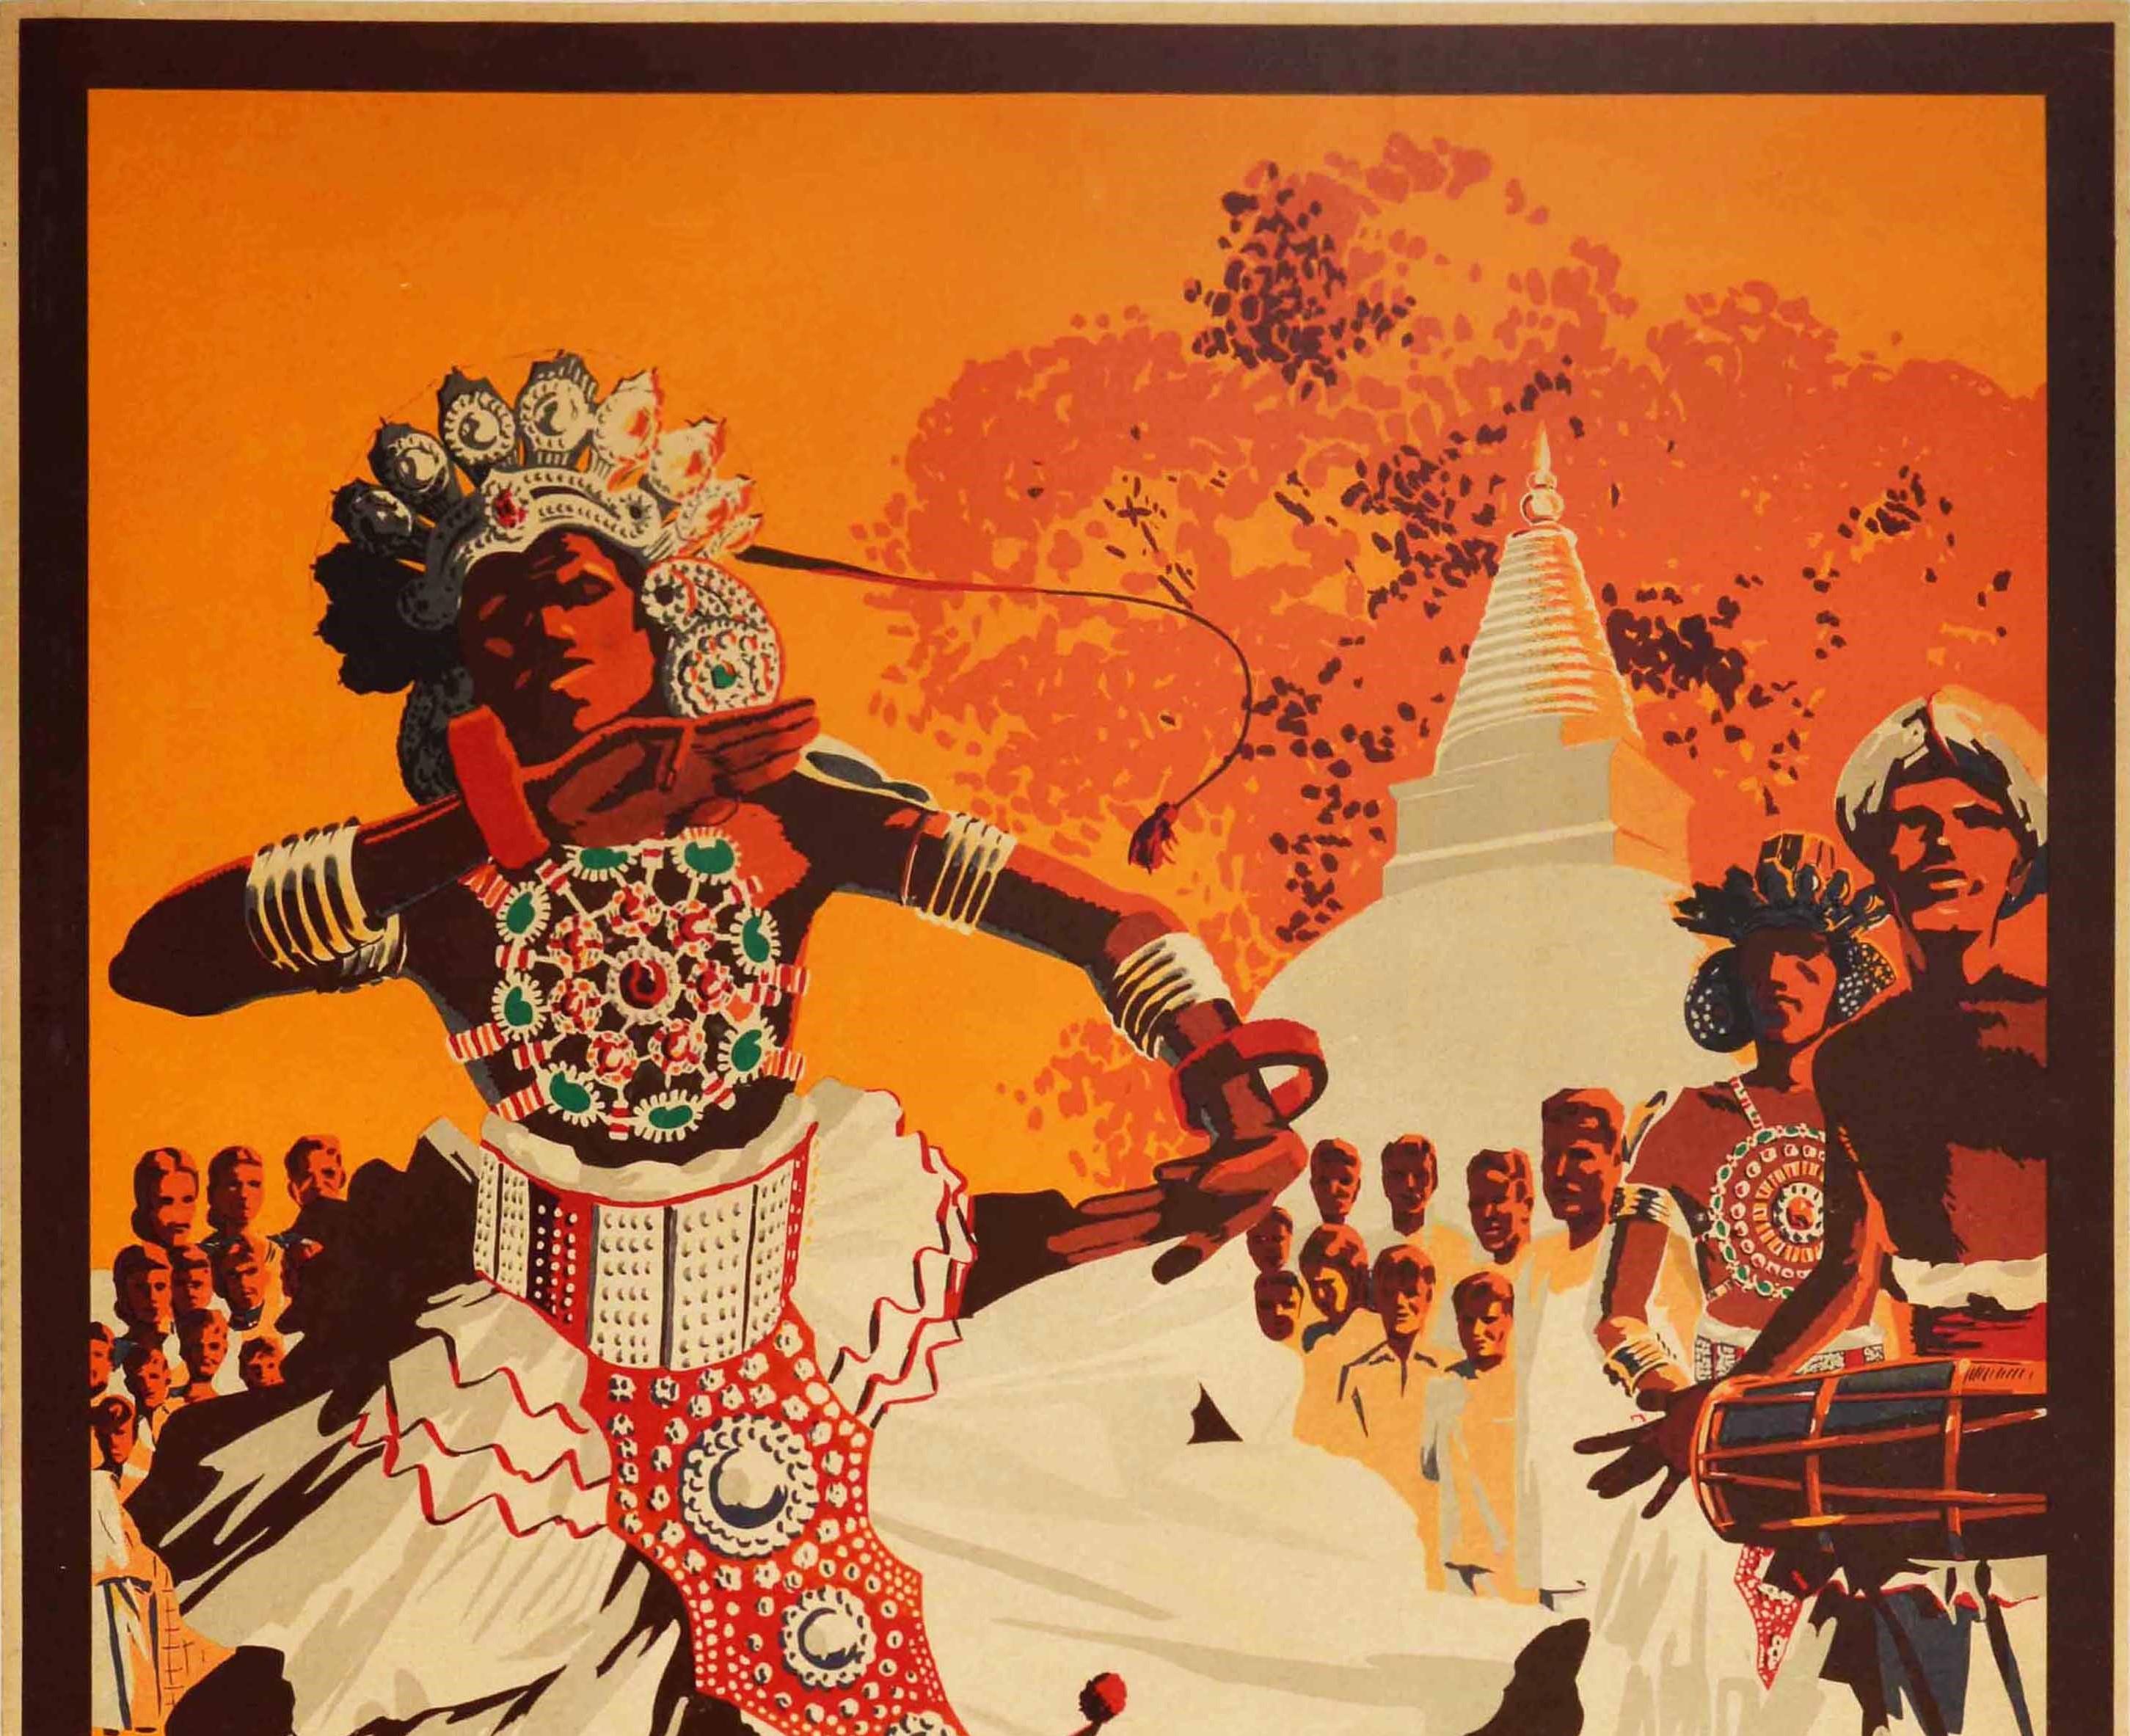 Original vintage travel poster for Ceylon Land of Song and Dance featuring a colourful orange shaded image of a traditional dancer in full costume and decorative headdress dancing in front of a domed Buddhist temple stupa and tree with people